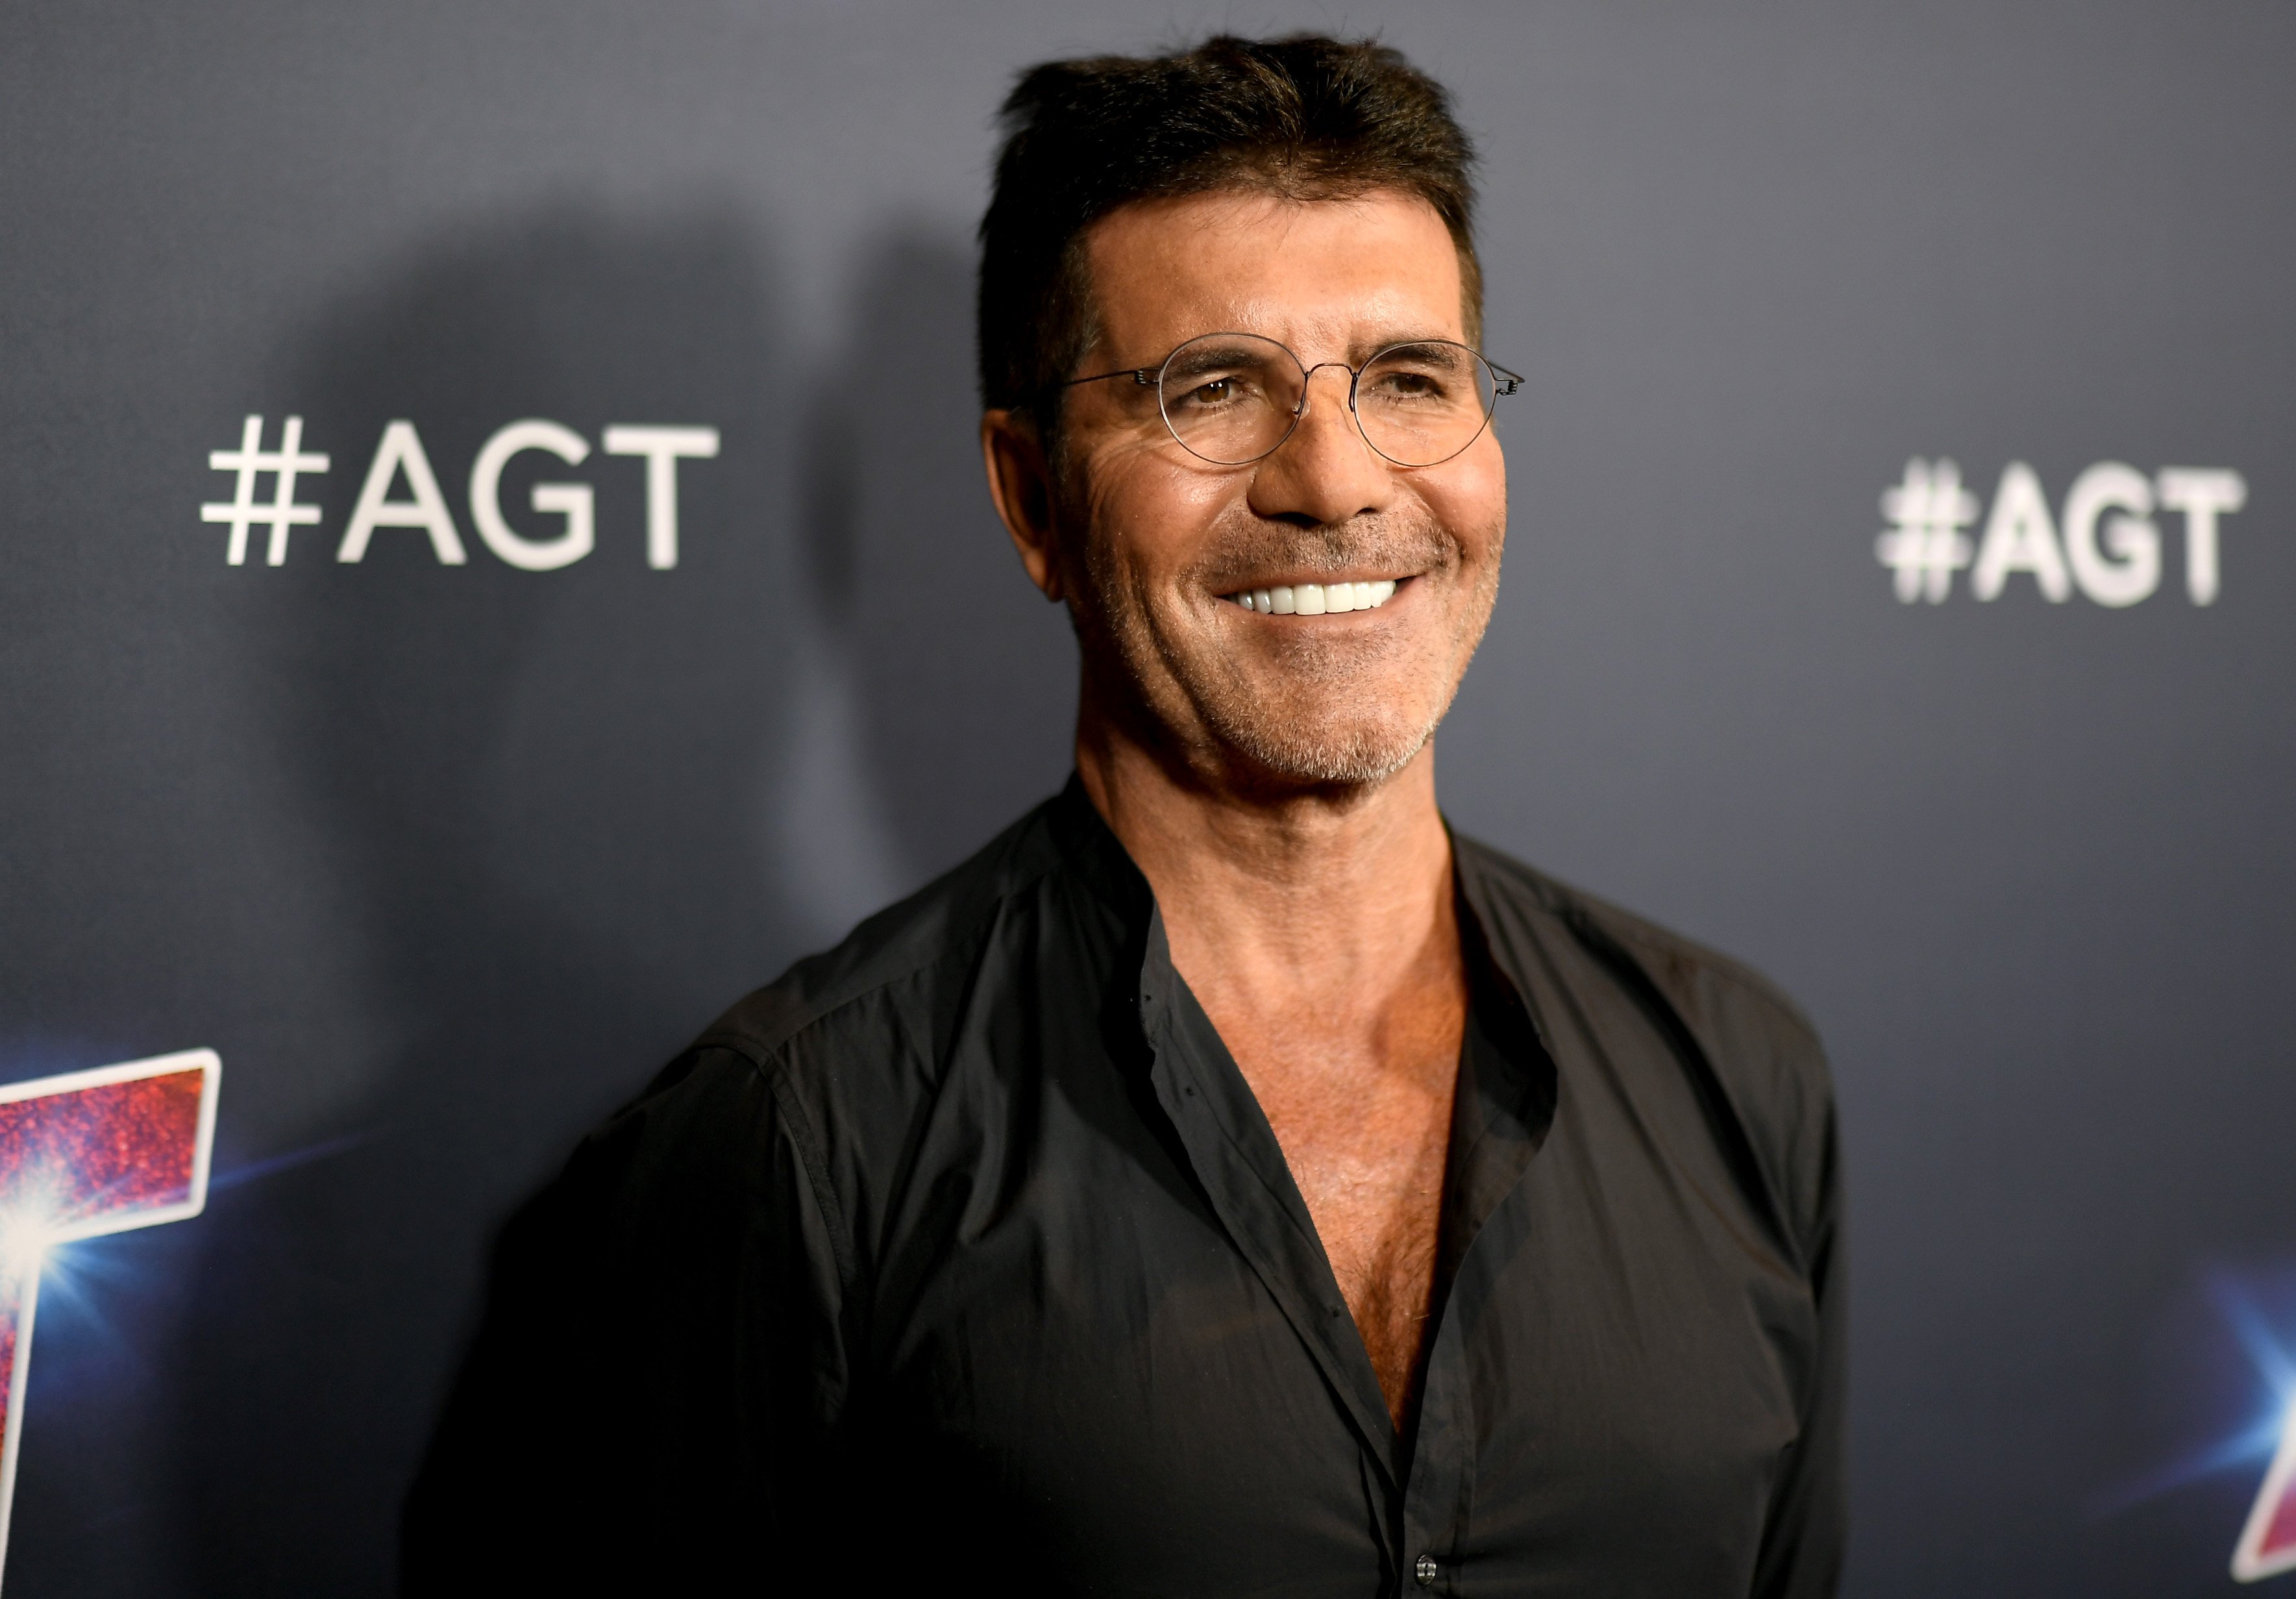 Simon Cowell at the "America's Got Talent" Season 14 live show red carpet at Dolby Theatre on September 17, 2019, in Hollywood, California | Source: Getty Images